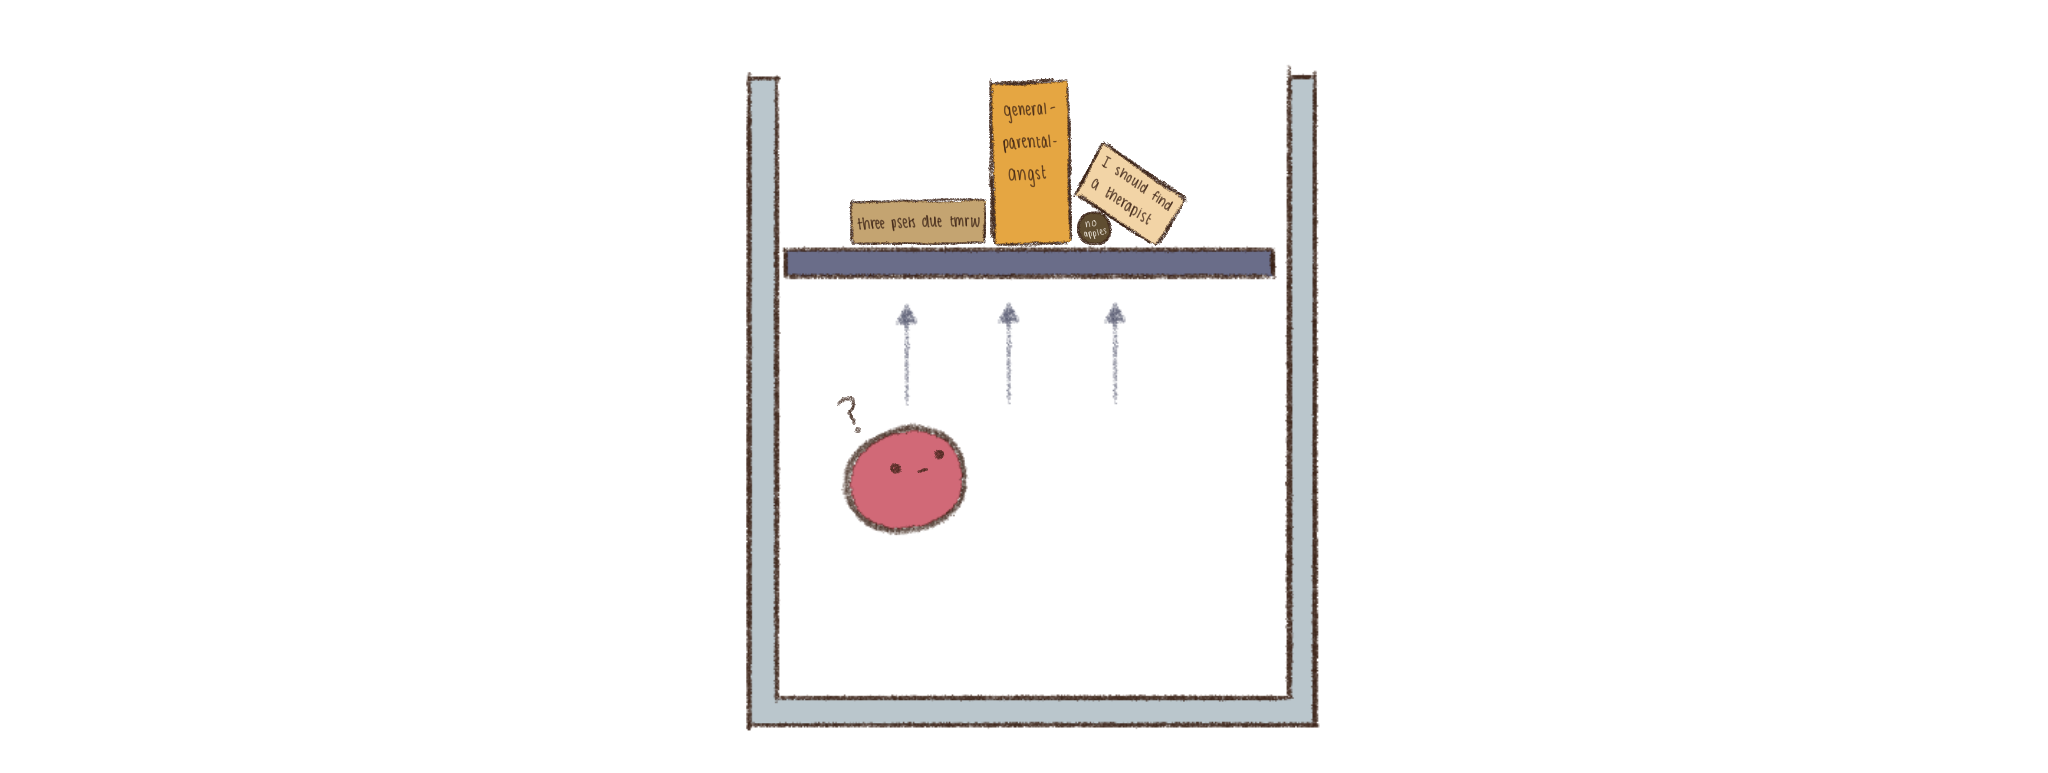 a pink particle inside a box looking concerned, with arrows pointing up to illustrate the direction of motion. There are weights pushing down on the top of the box